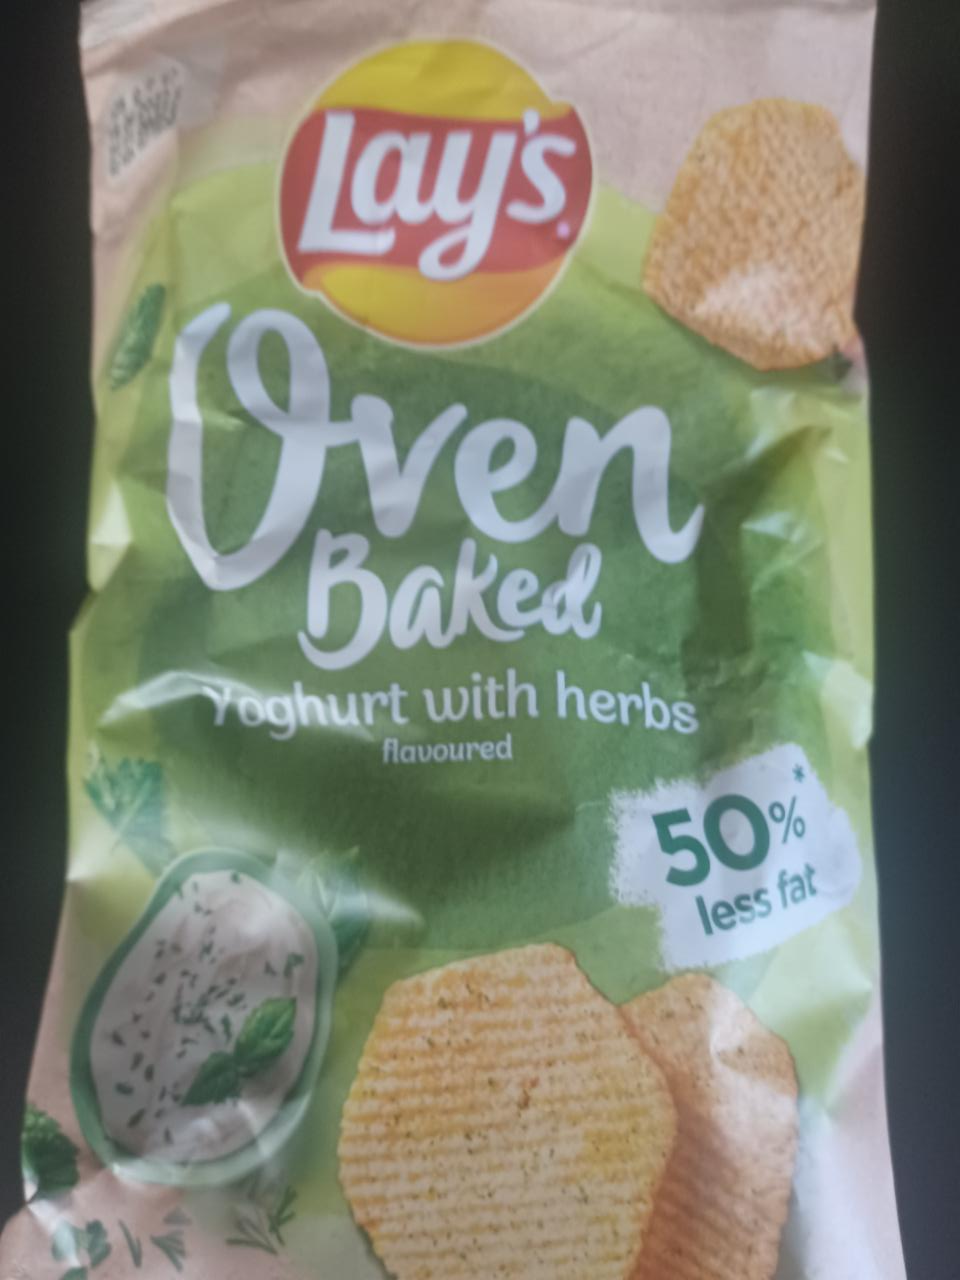 Fotografie - Oven Baked Youghurt with herbs flavoured Lay's